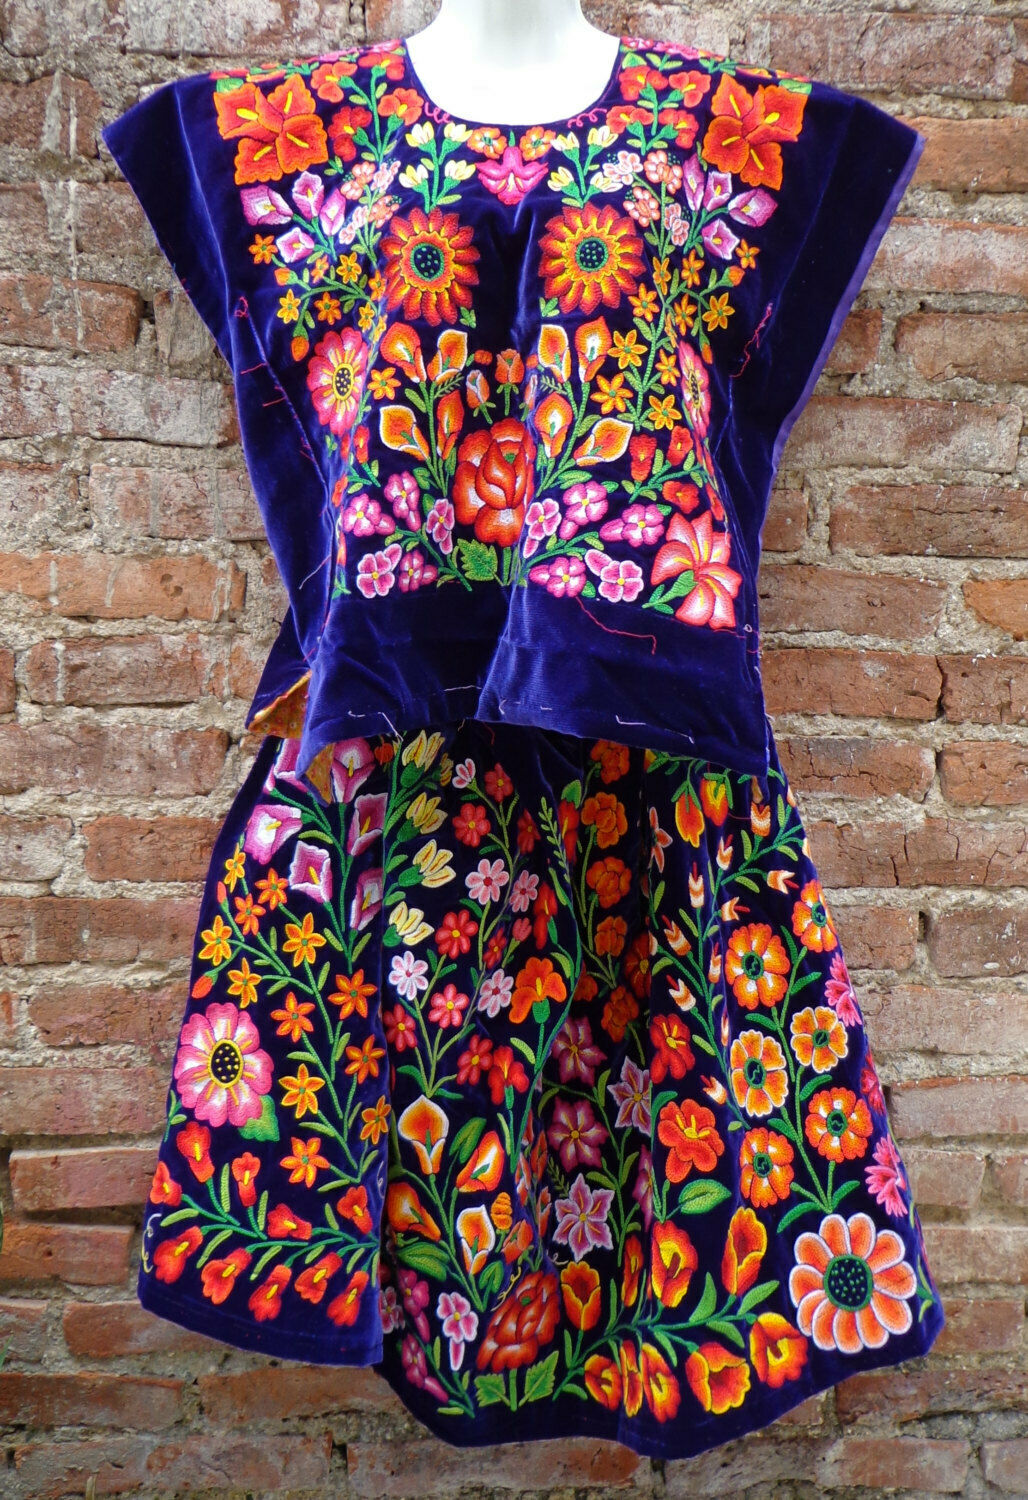 Tehuana Huipil Dress Outfit Hand Embroidered From Oaxaca Vintage Mexican